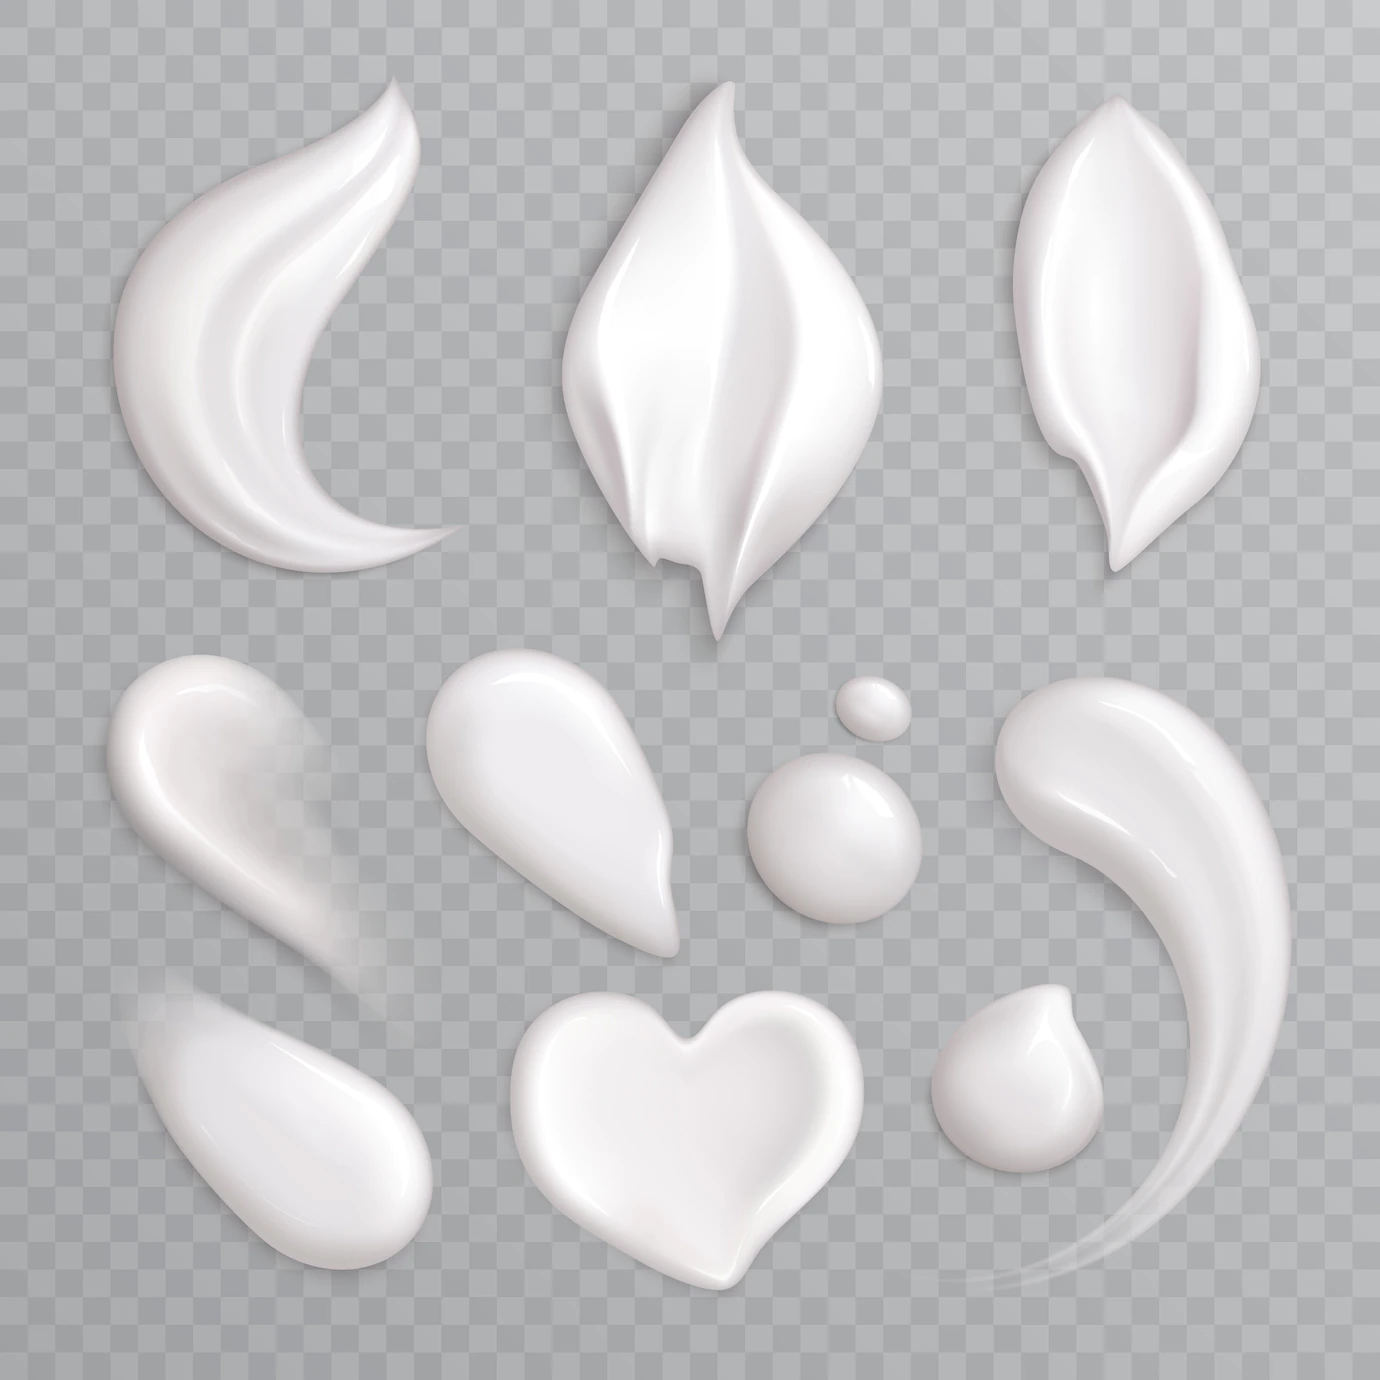 Cosmetic Cream Smears Realistic Icon Set With White Isolated Elements Different Shapes Sizes Illustration 1284 29336